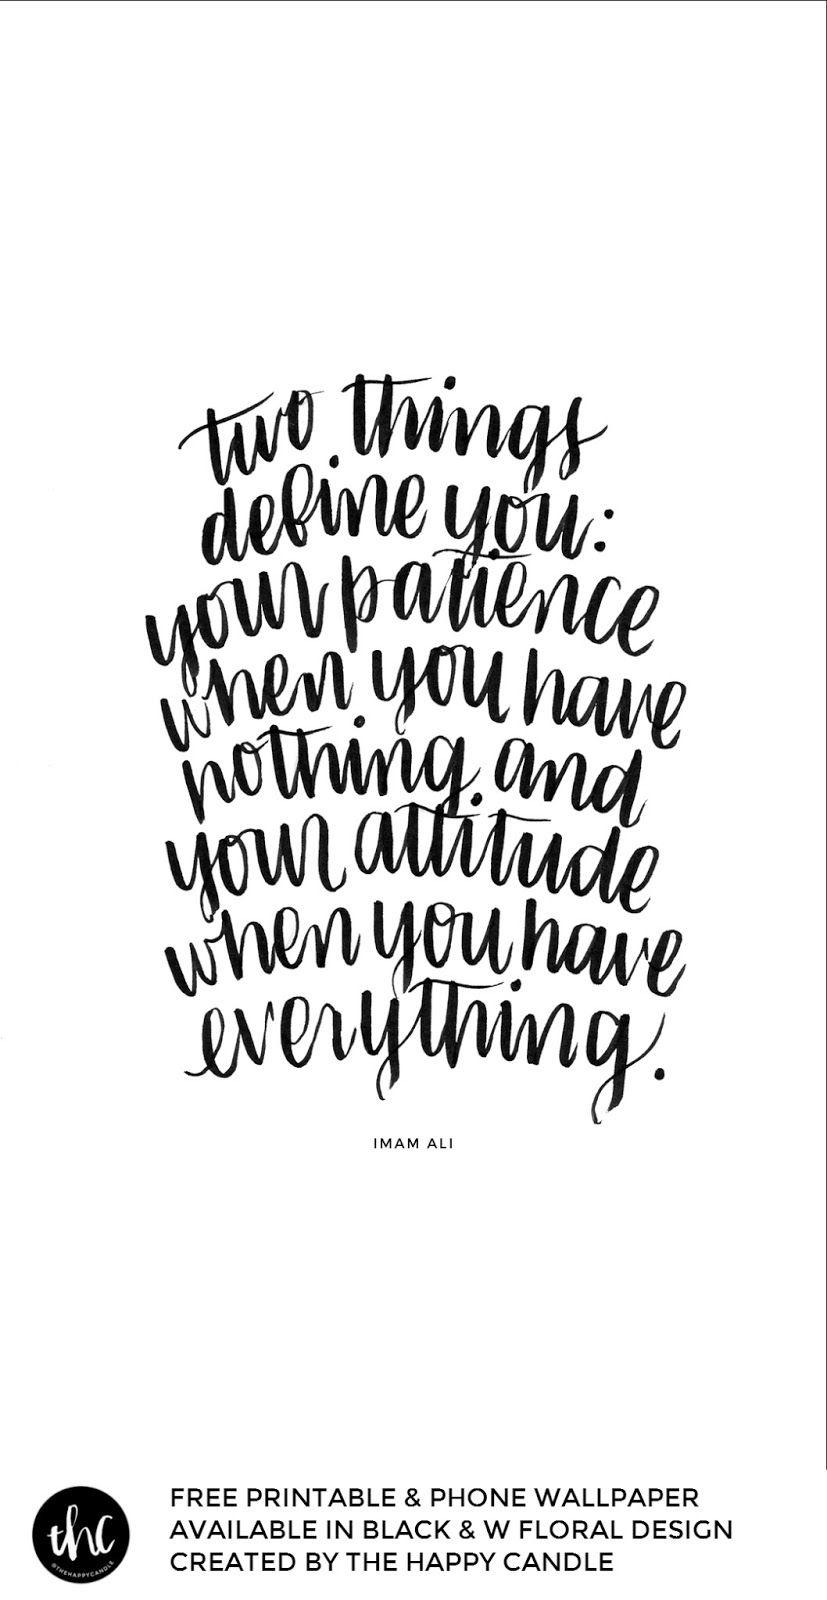 Free Printable and Phone Wallpaper / 'Two things define you